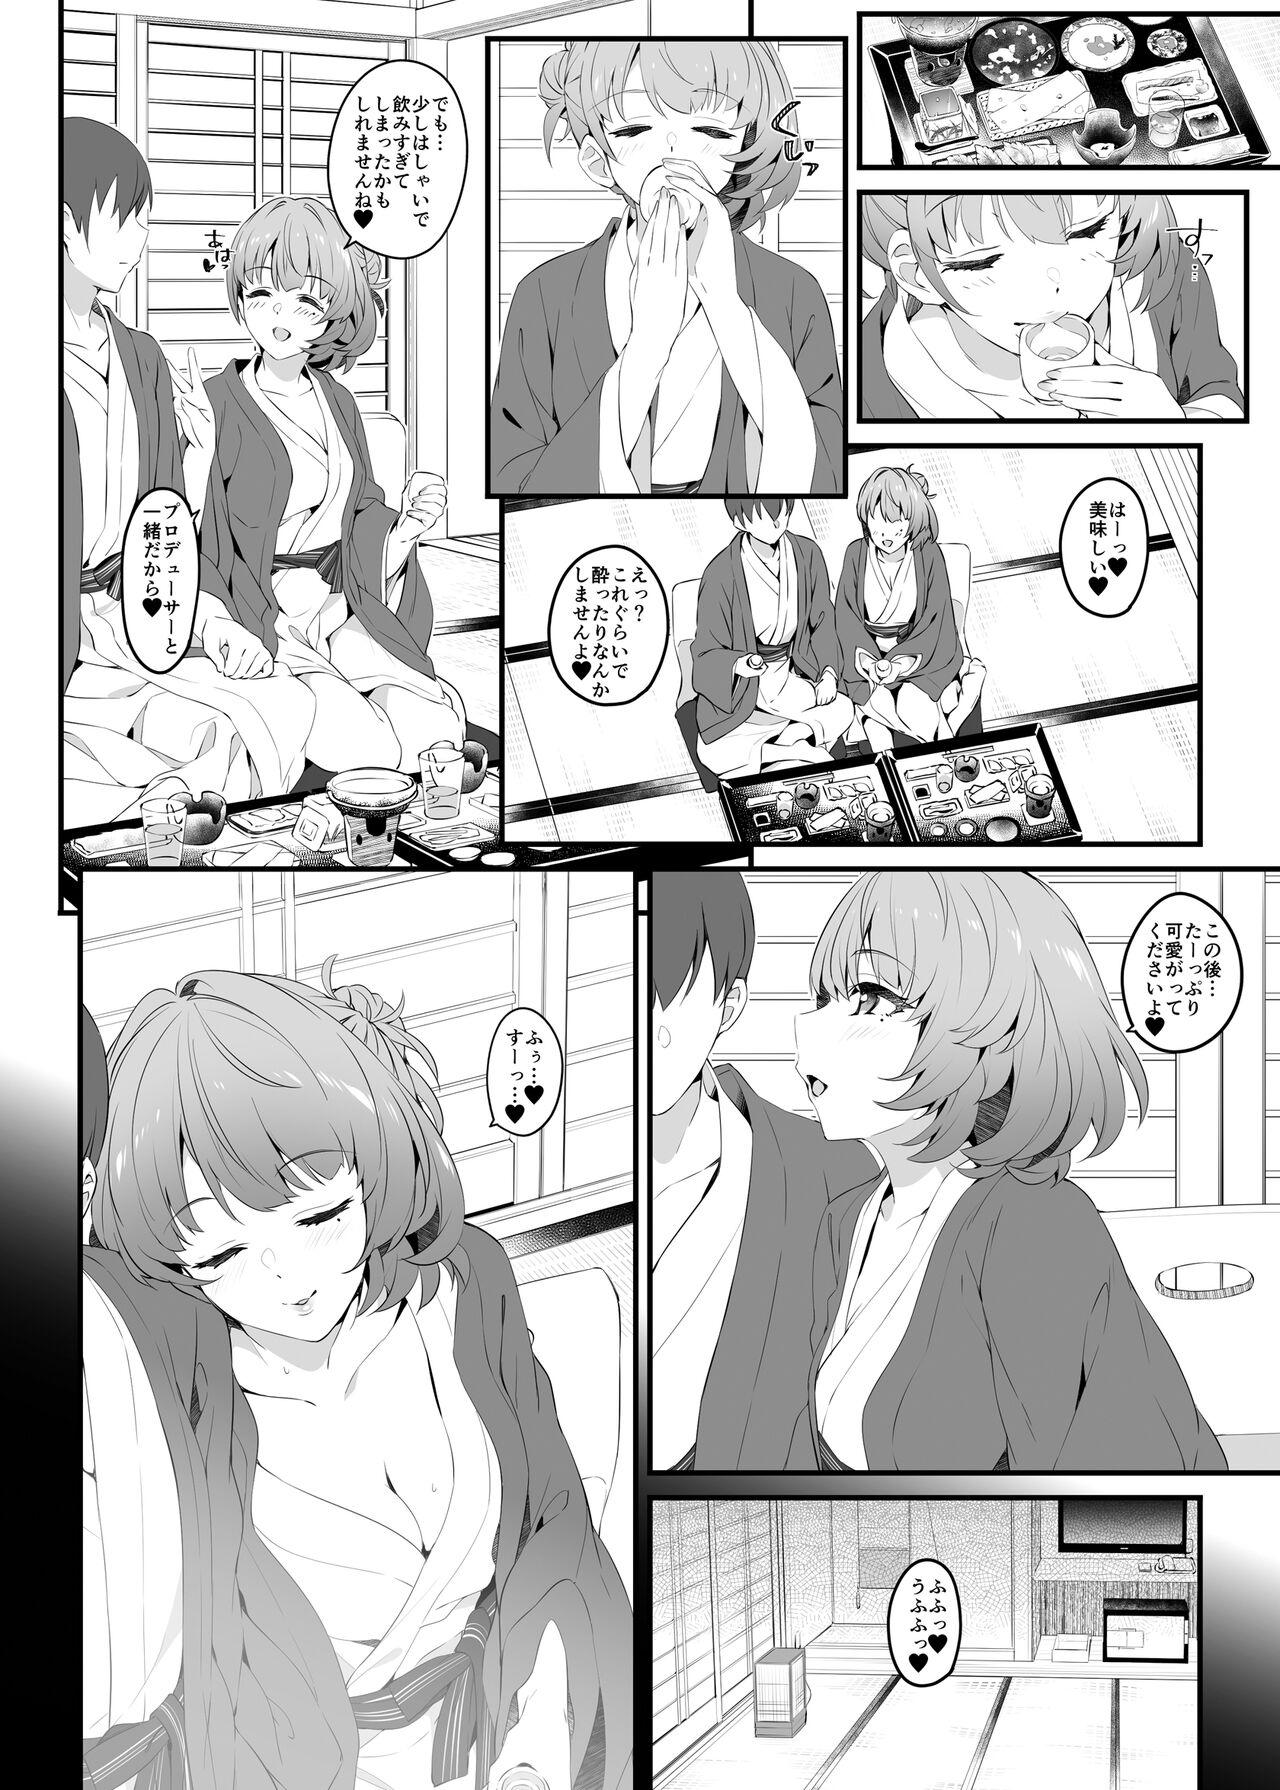 Panty Flowers blooming at night and the kings in the dream. - The idolmaster White Girl - Page 8